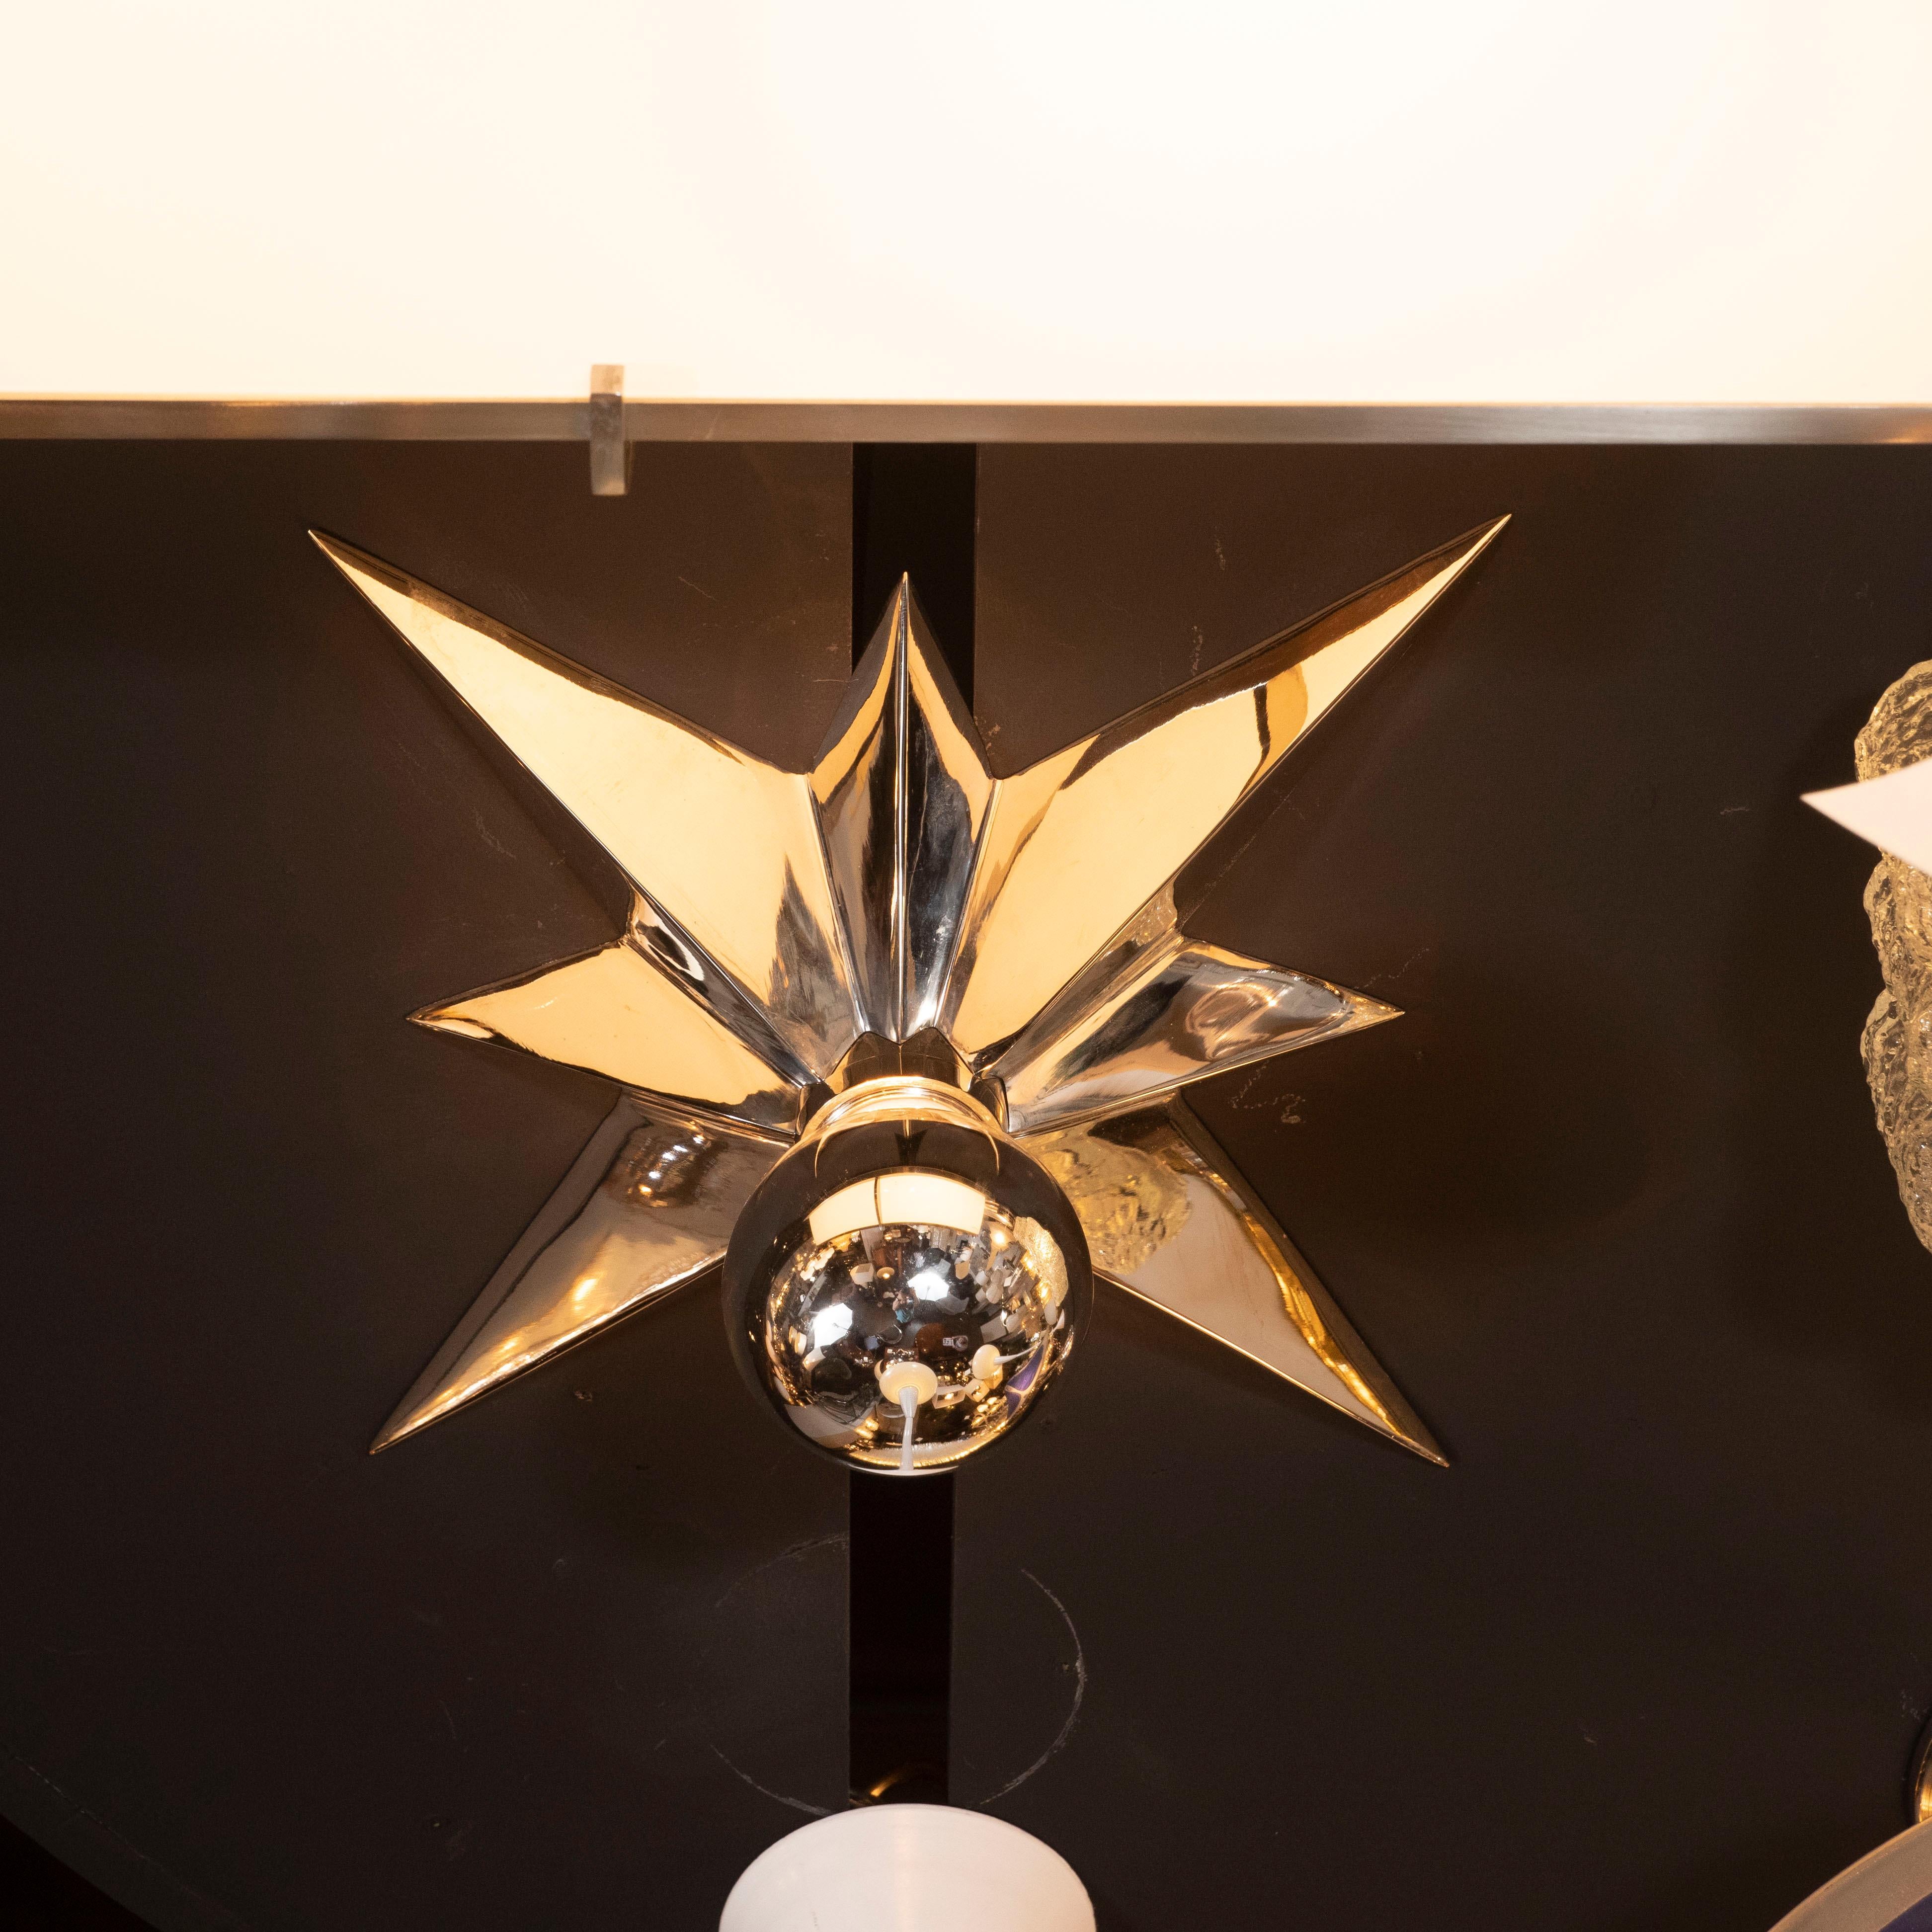 This graphic and refined set of three flush mounts were realized in the United States, circa 1980. Each flush mount features an eight pointed star executed in lustrous polished nickel that tapers towards each end. A mercury bulb lies in the center